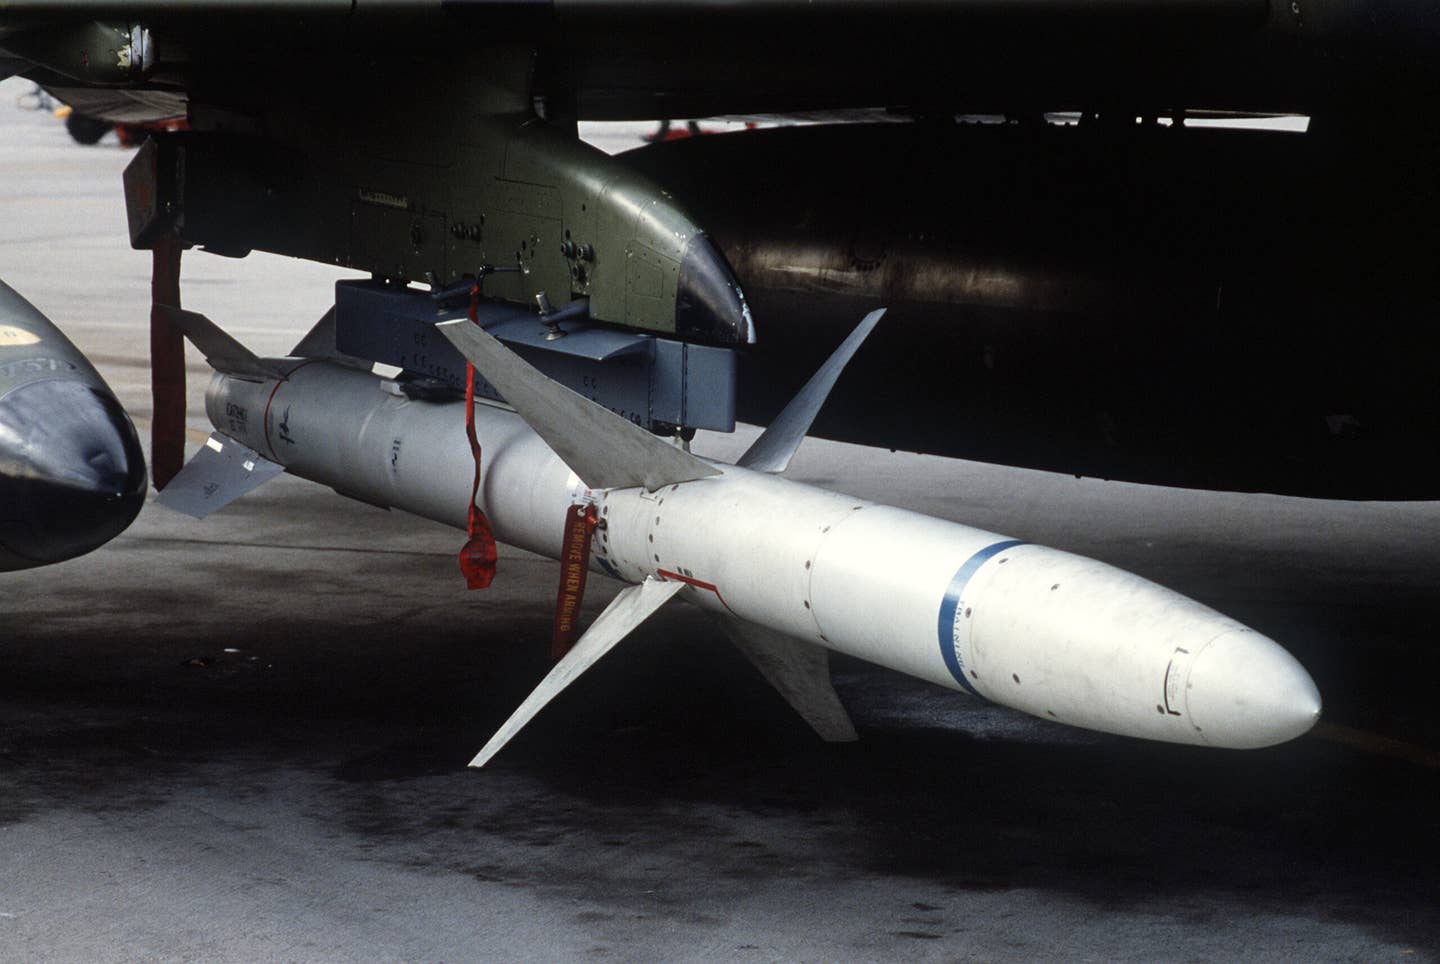 A view of an AGM-88 HARM high-speed anti-radiation missile mounted beneath the wing of a 37th Tactical Fighter Wing F-4G Phantom II "Wild Weasel" aircraft. <em>Credit: Ssgt. Scott Stewart/Wikimedia Commons</em>